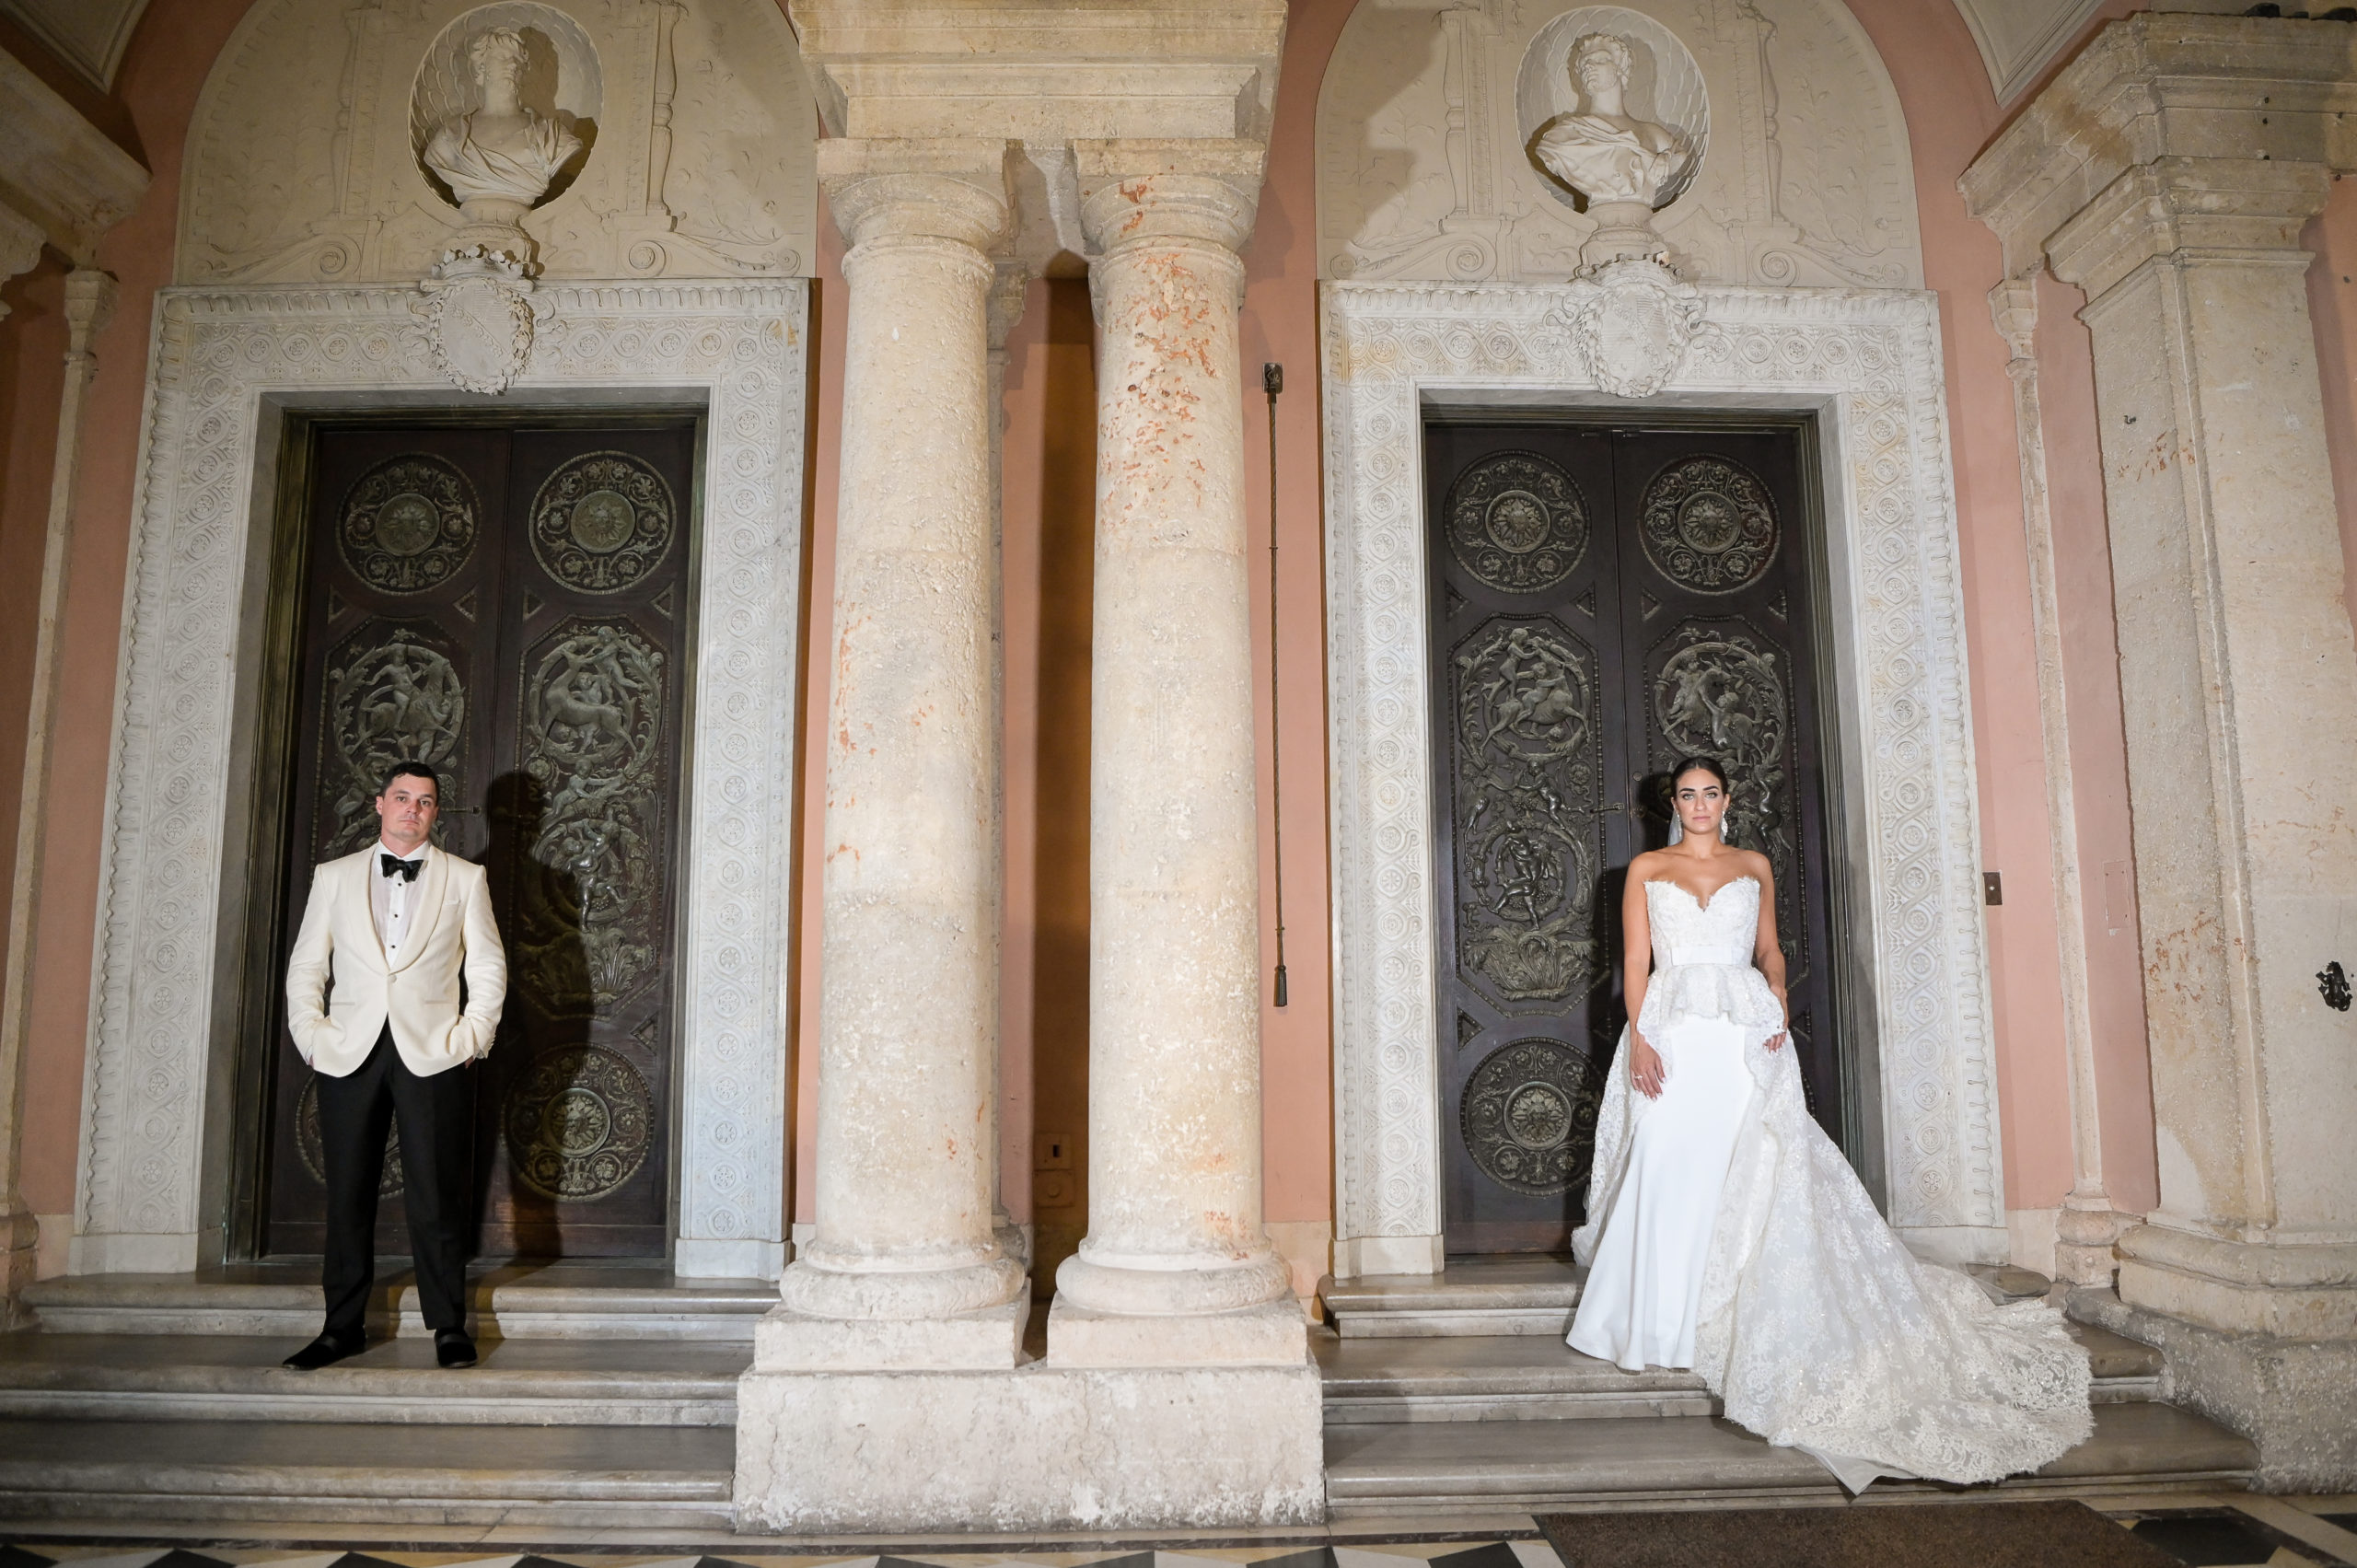 A bride and groom posing for a picture in front of the doors.